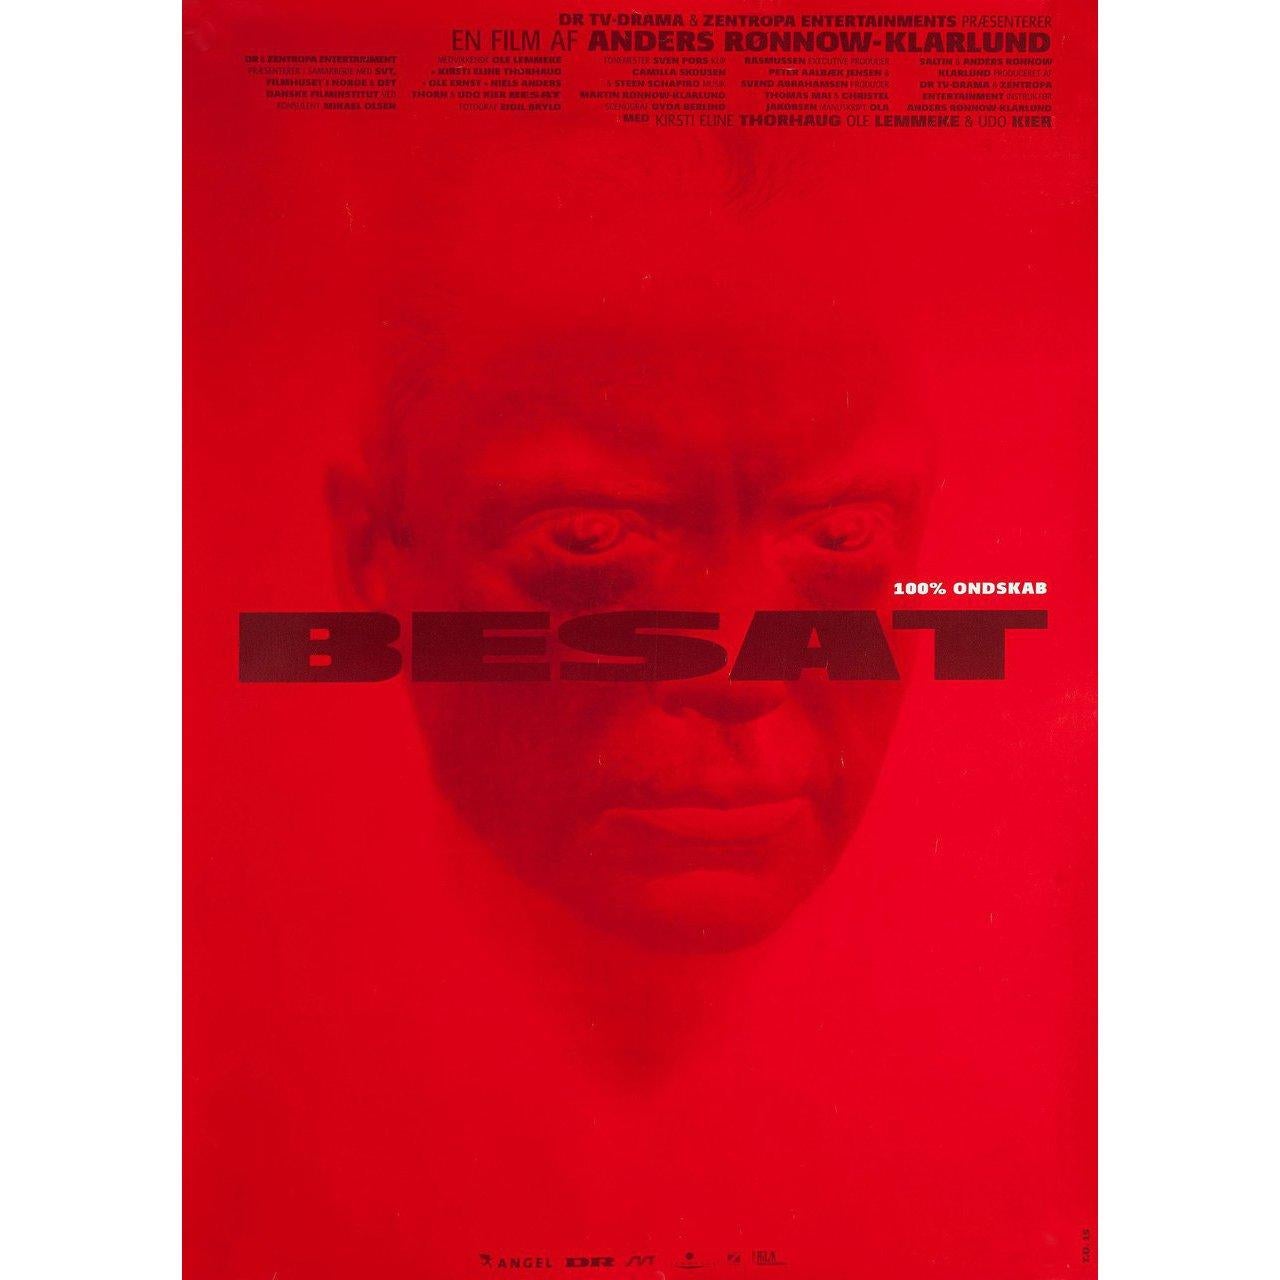 Original 1999 Danish A1 poster for the film “Possessed” (Besat) directed by Anders Ronnow Klarlund with Ole Lemmeke / Kirsti Eline Torhaug / Ole Ernst / Niels Anders Thorn. Very Good fine condition, rolled. Please note: the size is stated in inches